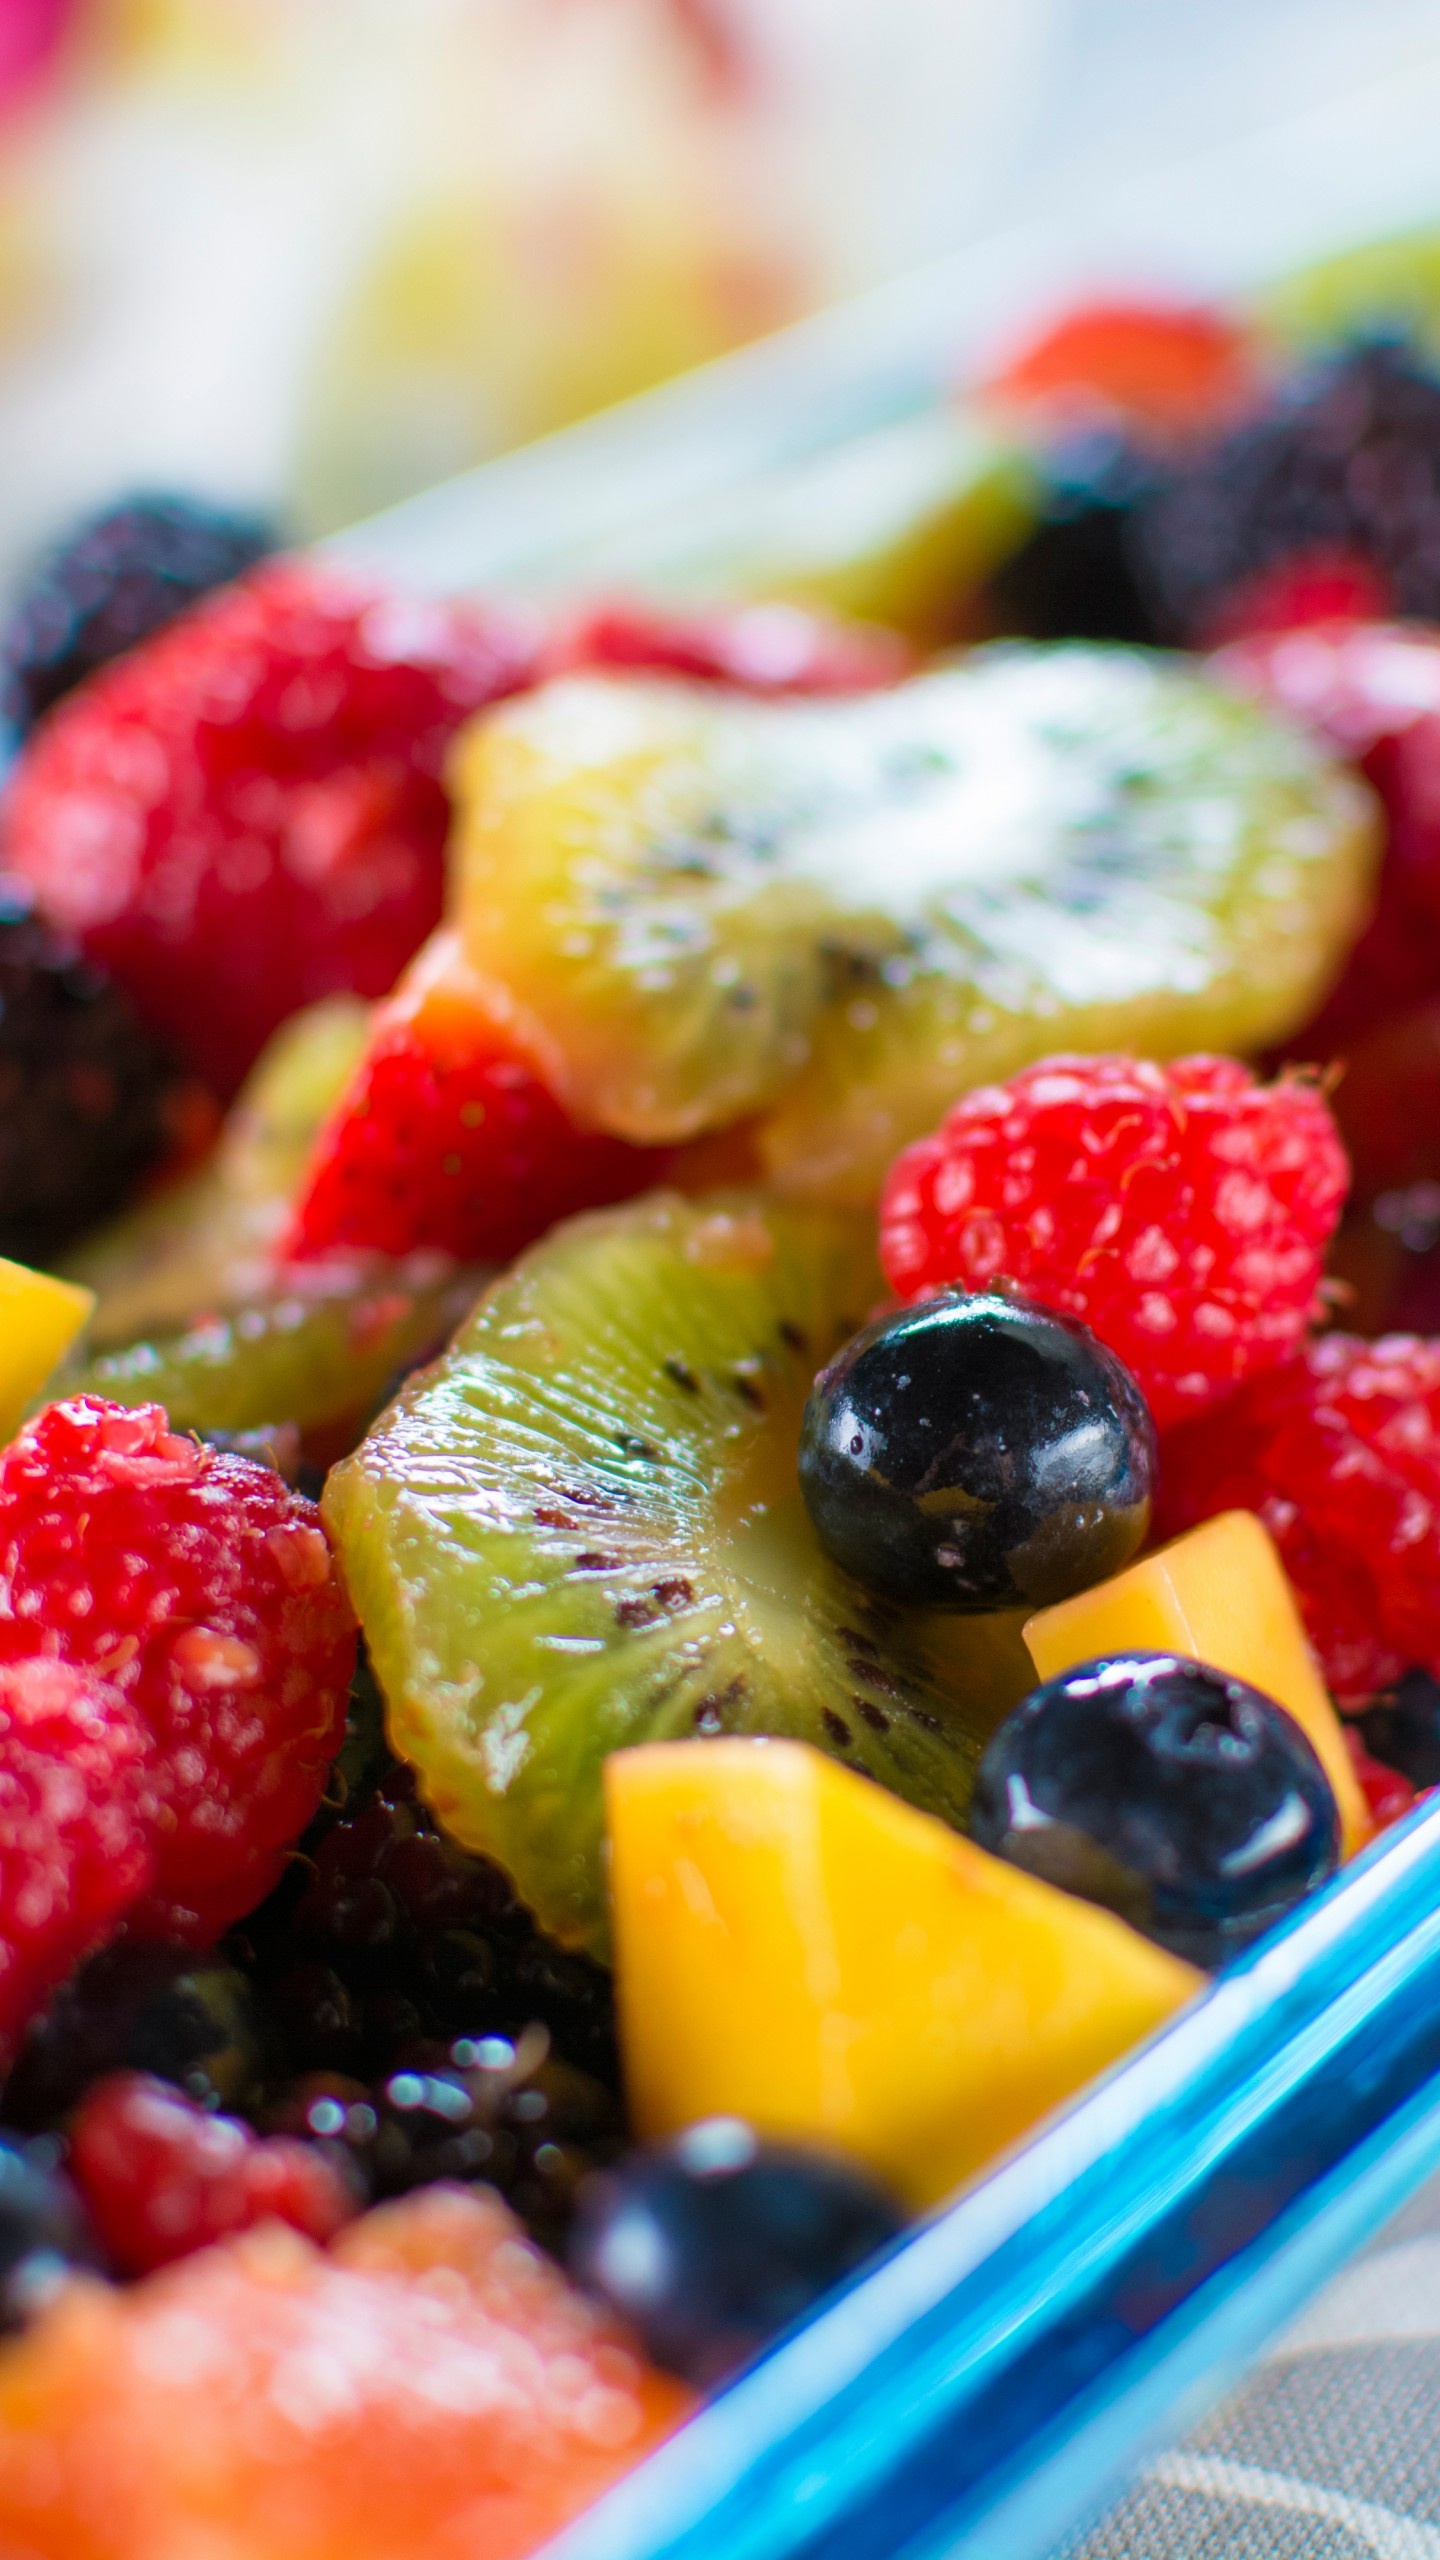 Fresh fruit salad, Mixed berries, Tropical delight, Wholesome and flavorful, 1440x2560 HD Handy